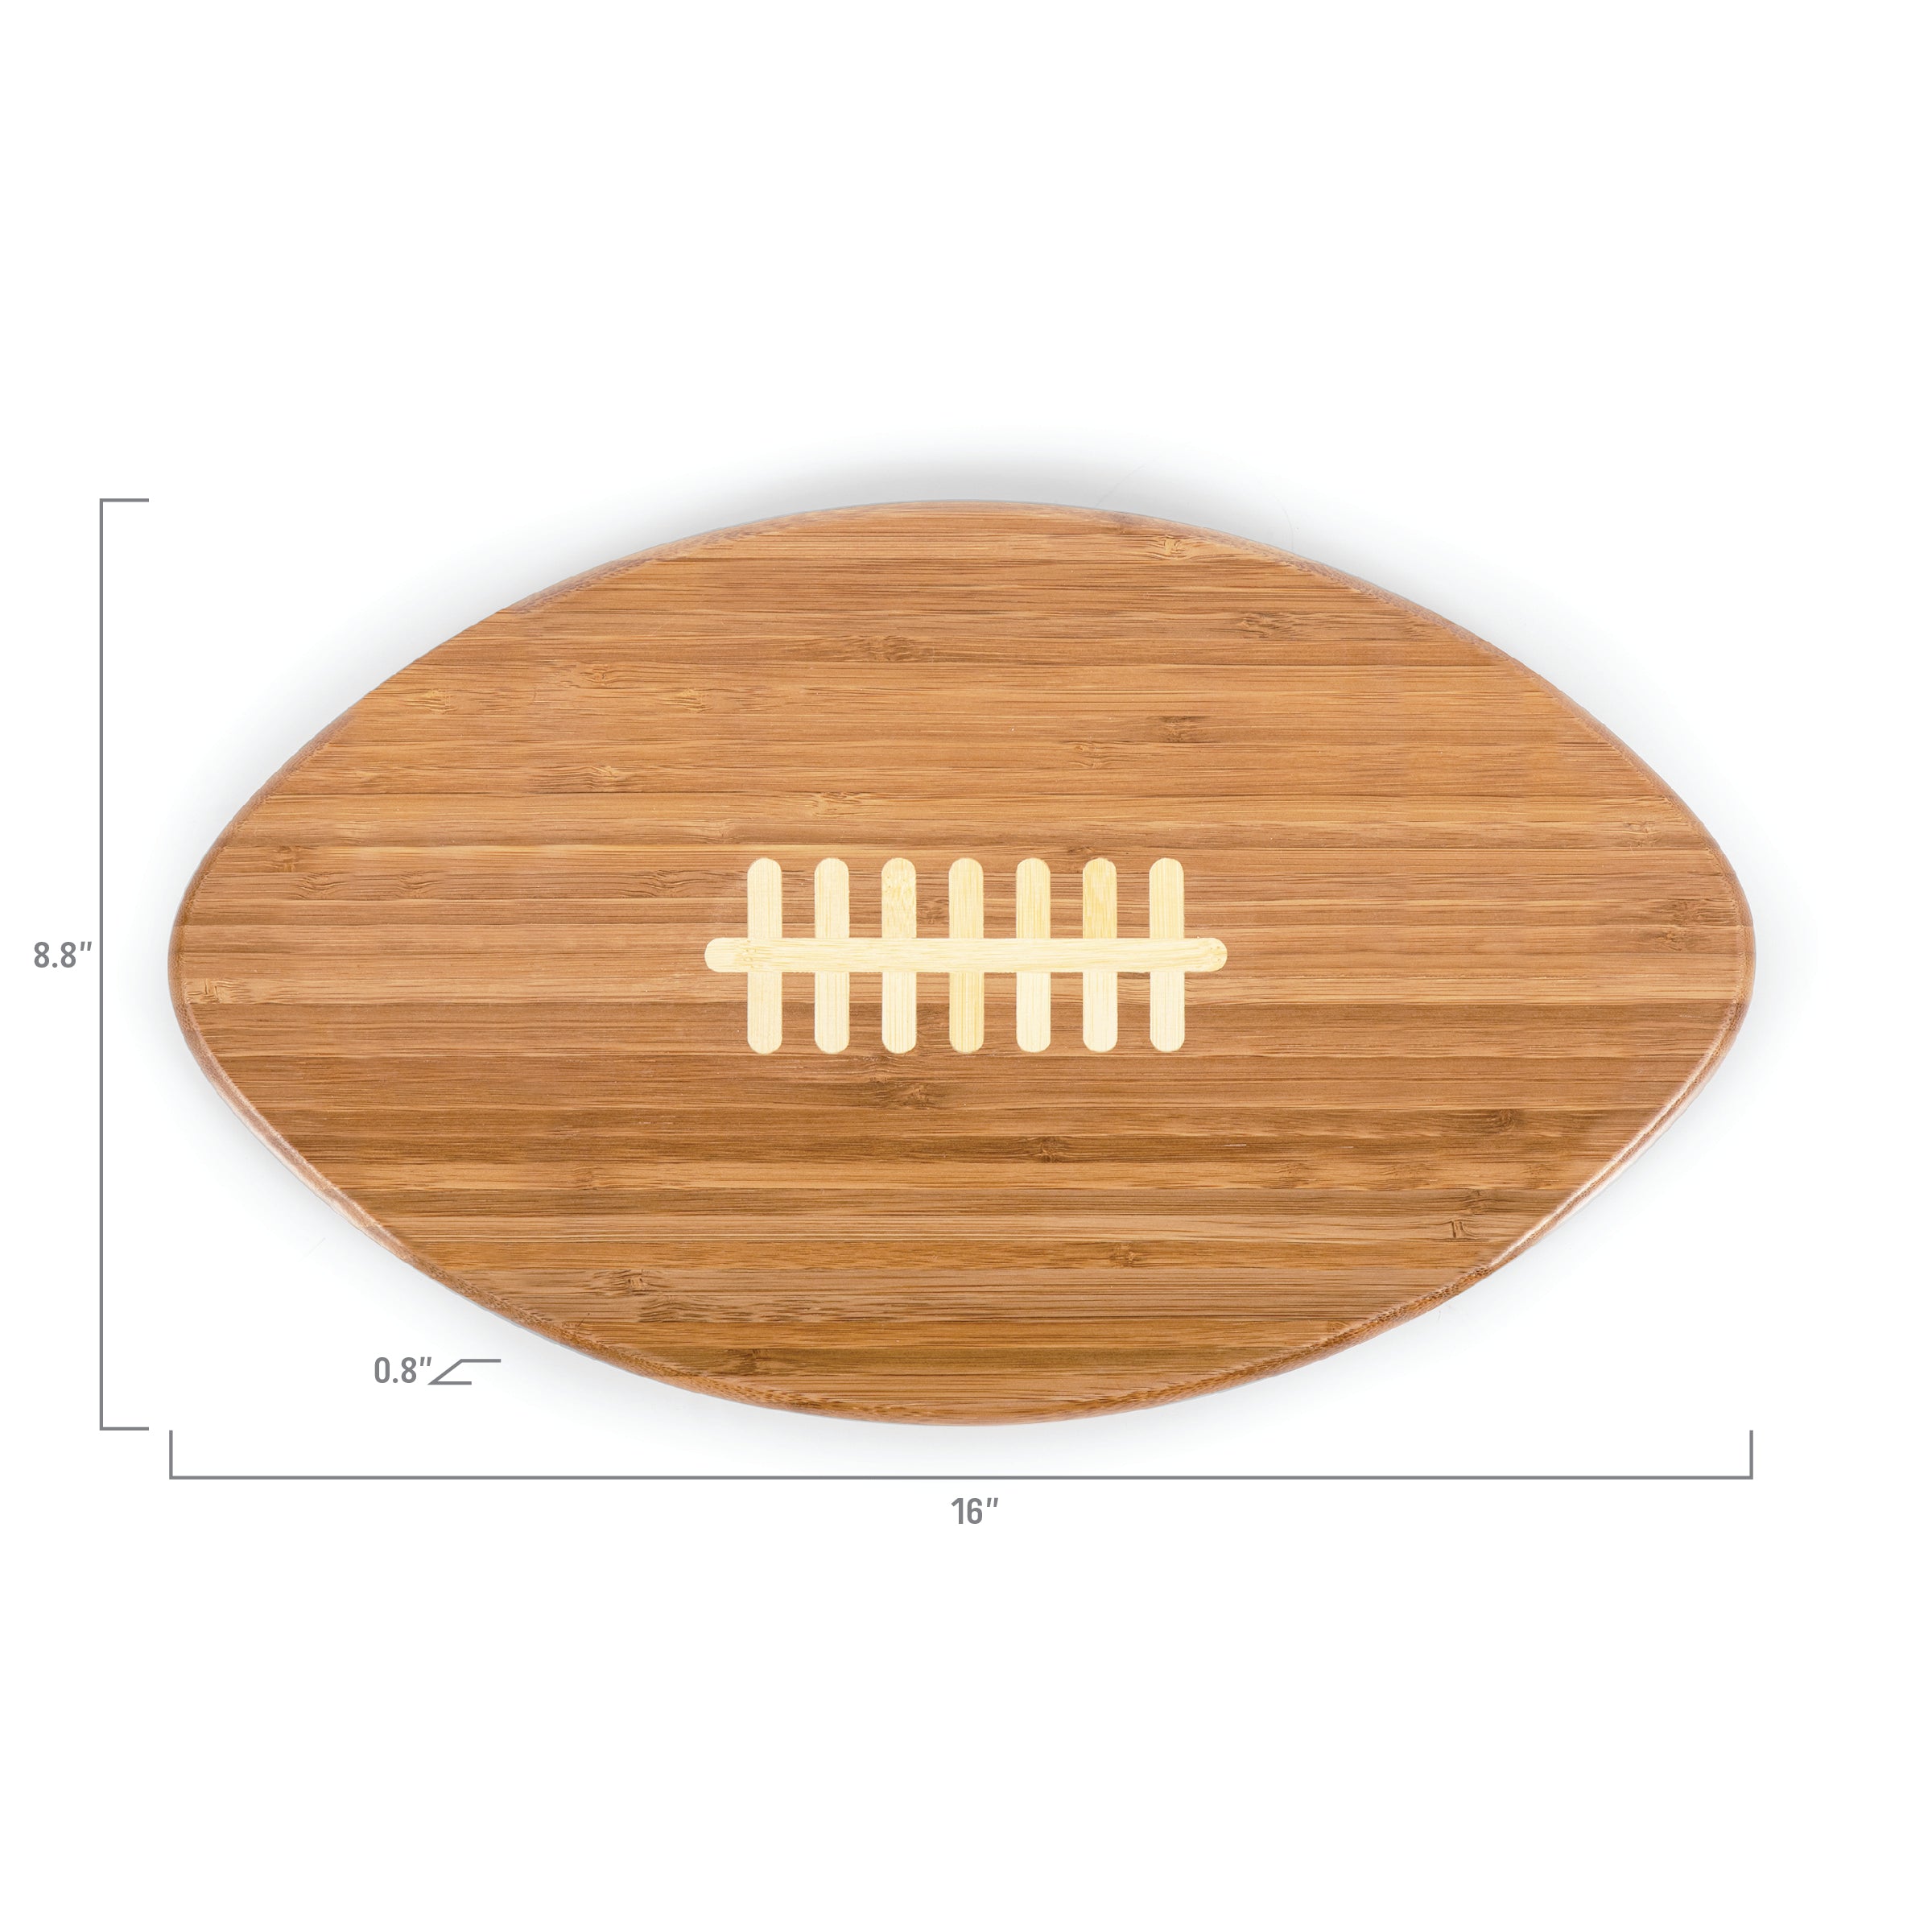 Pittsburgh Steelers - Touchdown! Football Cutting Board & Serving Tray